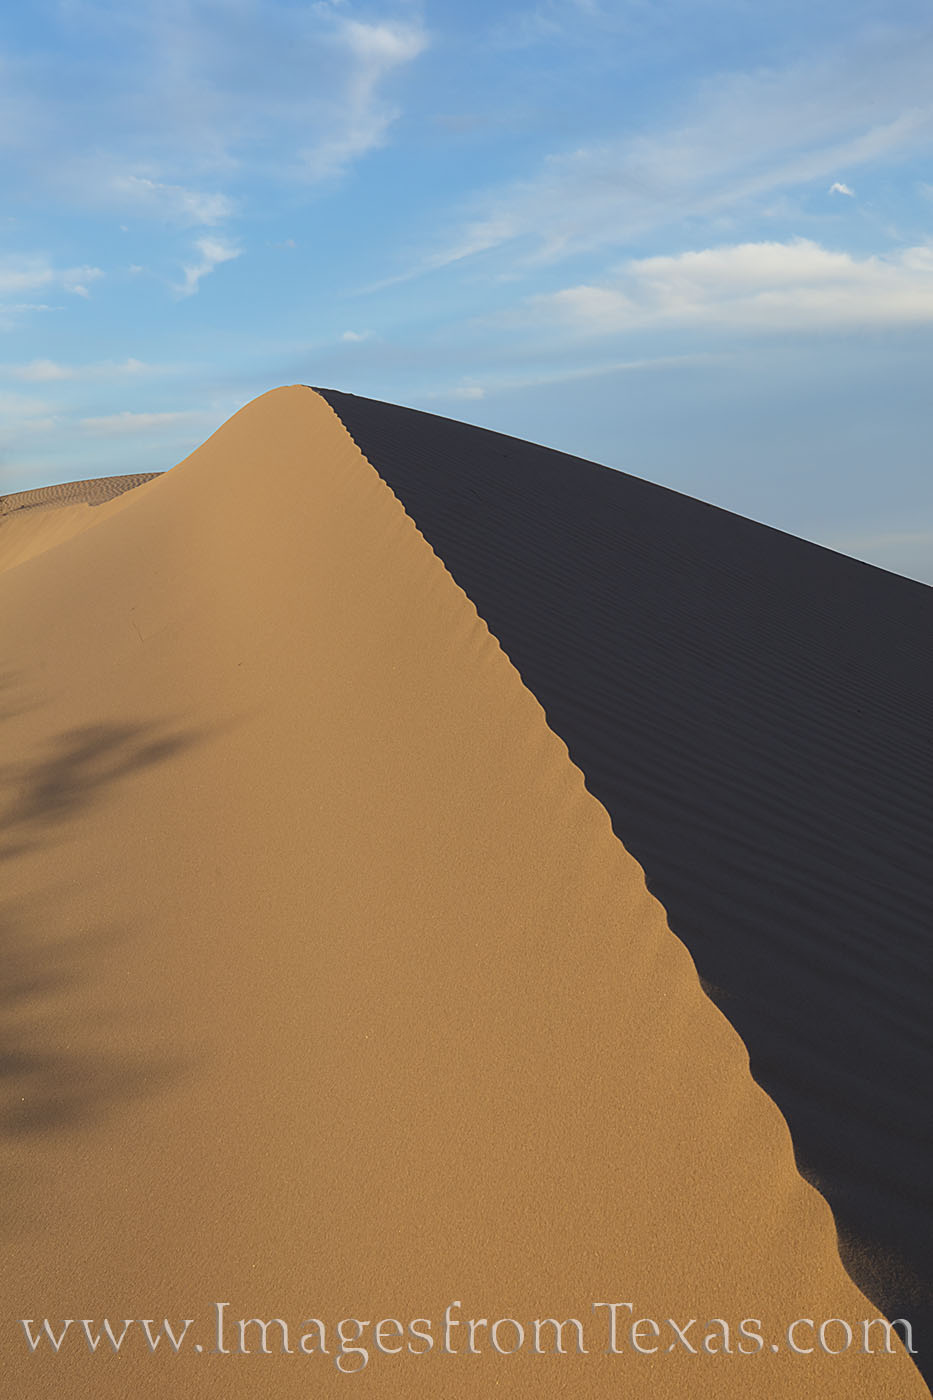 This image of a sand dune shows the play of light on a March evening. Taken at Monahans Sandhills State Park in west Texas, the...